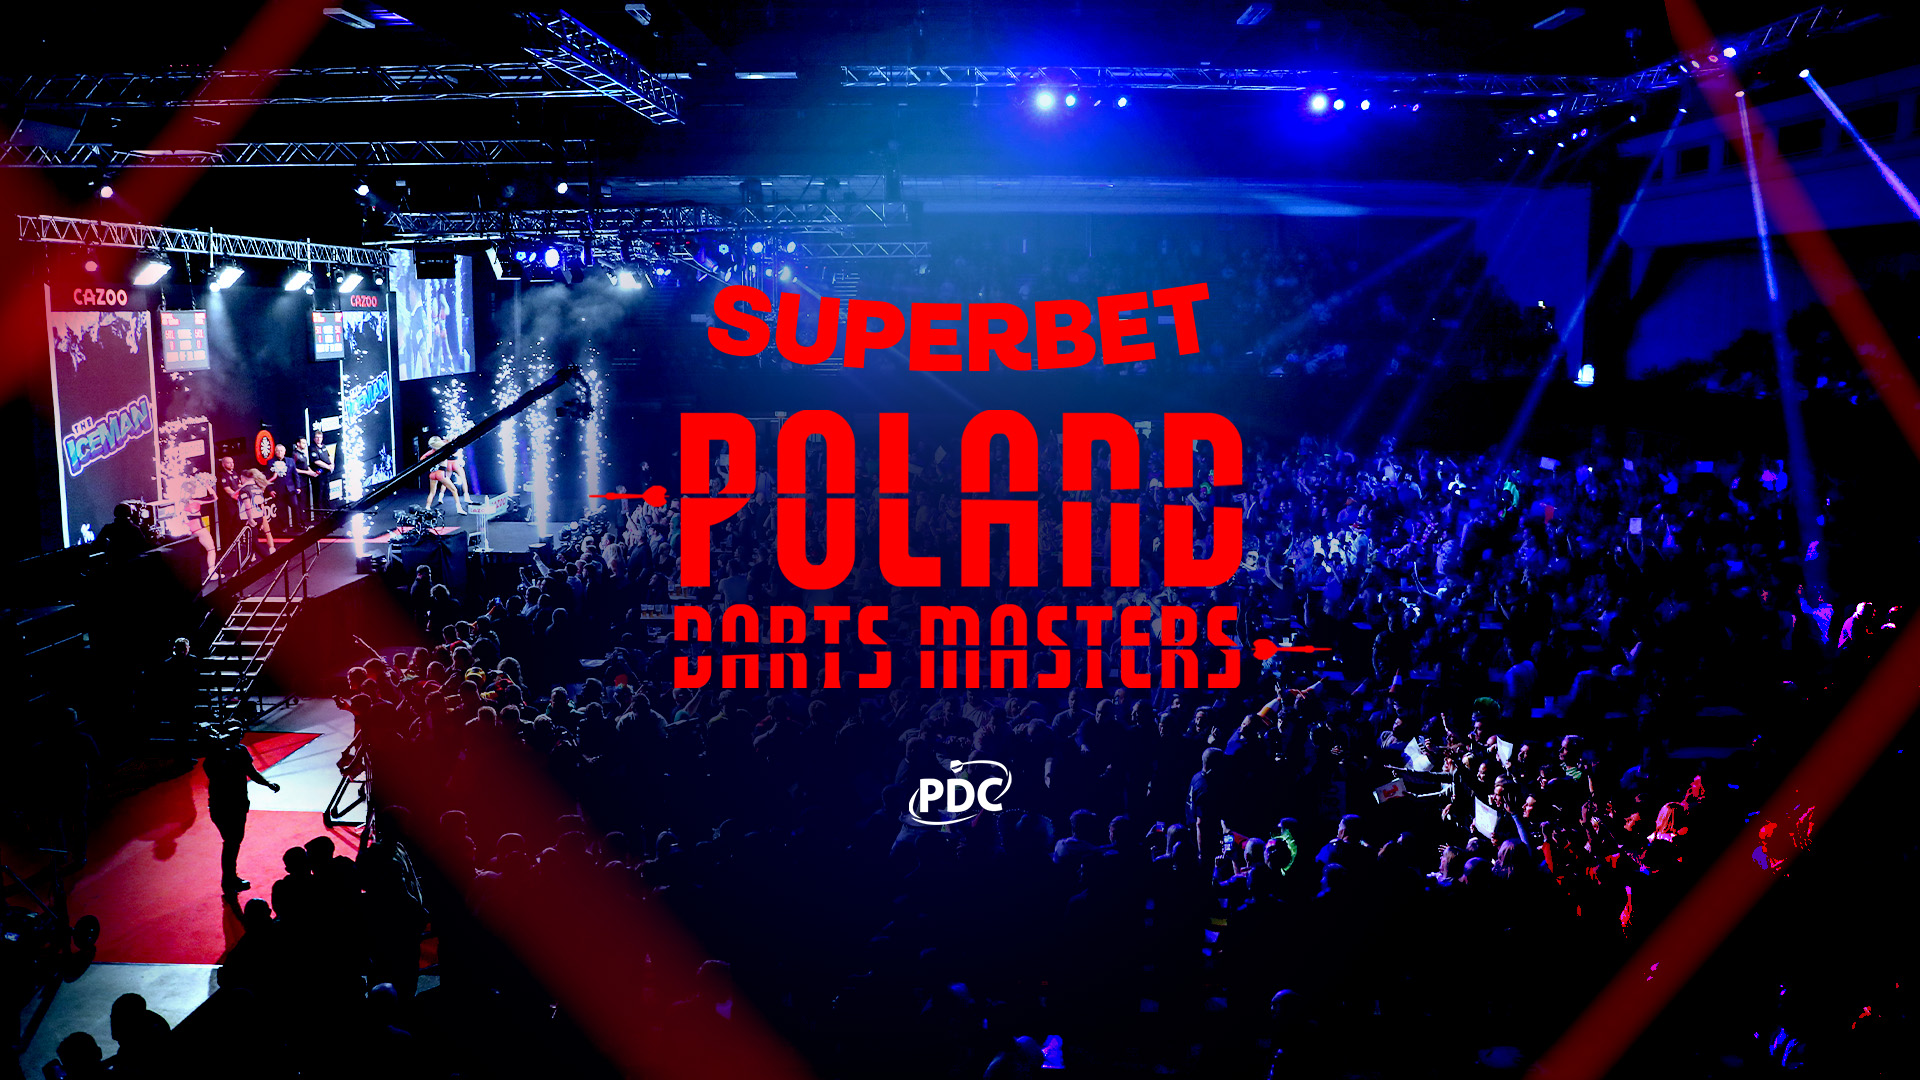 Superbet announced as title sponsor of Poland Darts Masters PDC